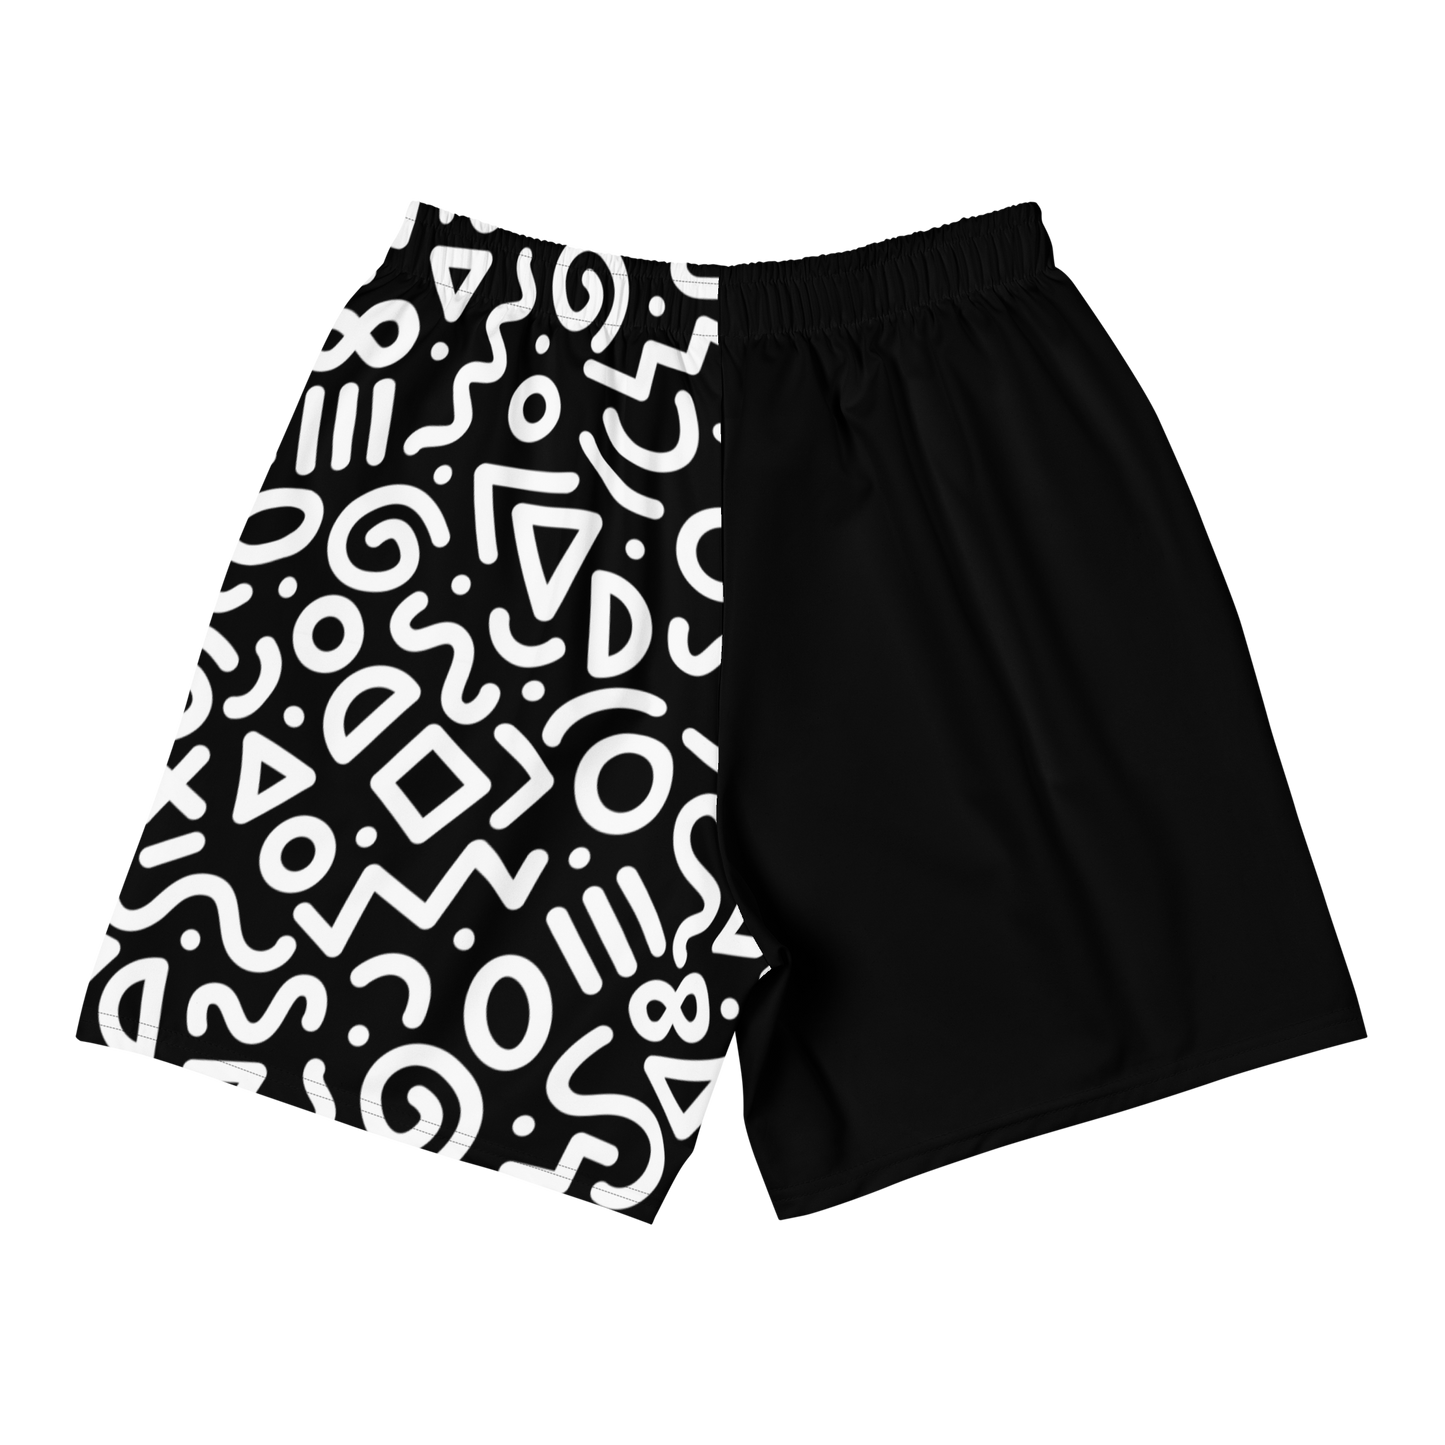 THE BRAND MENS SHORTS